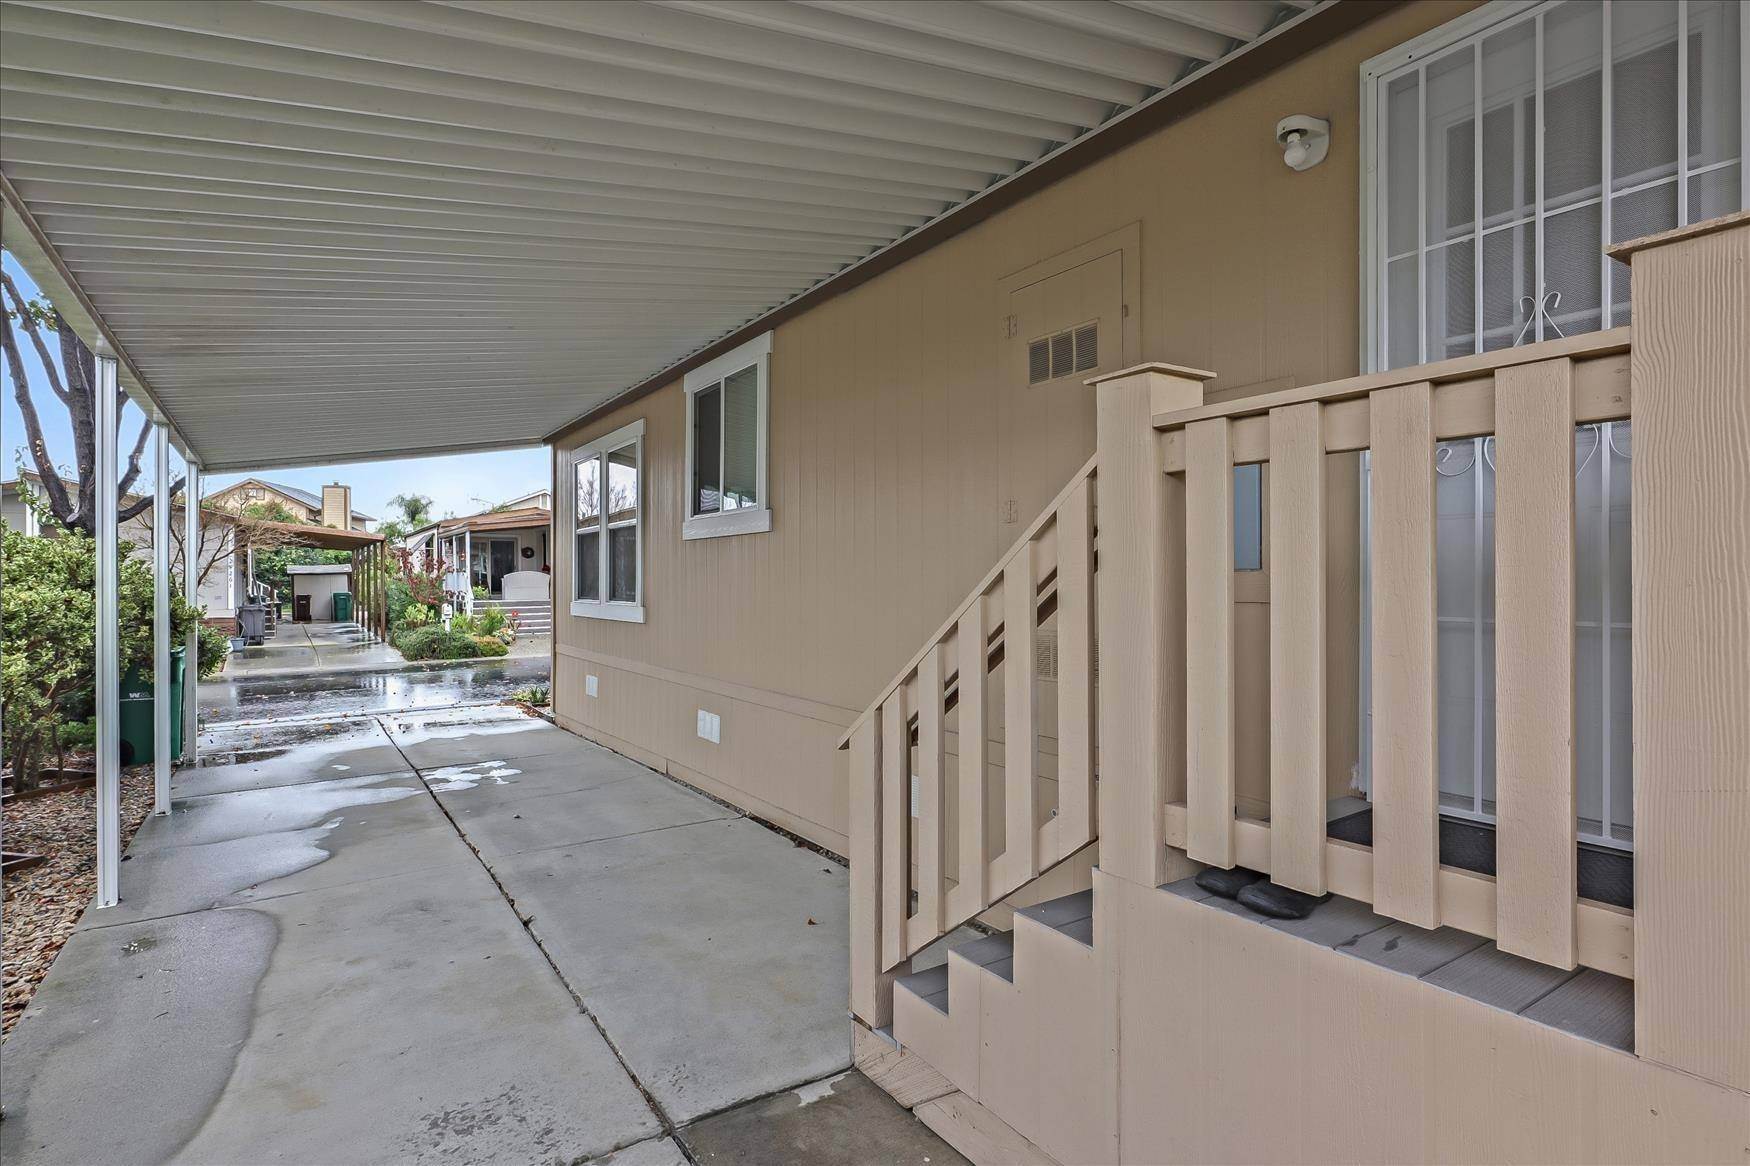 2. Mobile Home for Sale at Hayward, CA 94544